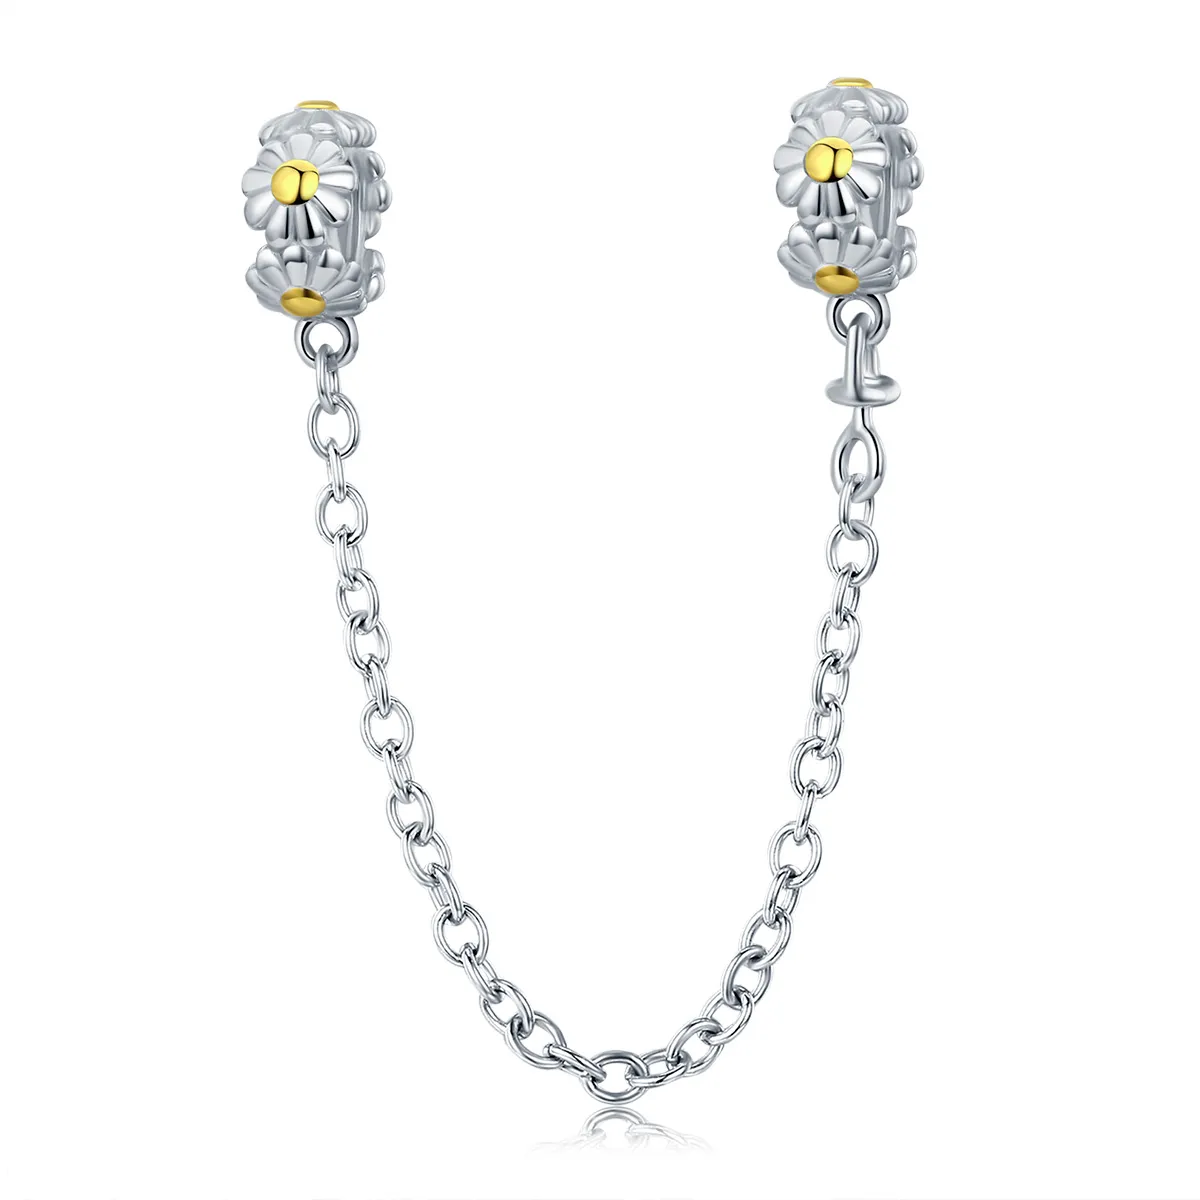 Pandora Style Two Tone Daisy Safety Chain - SCC618